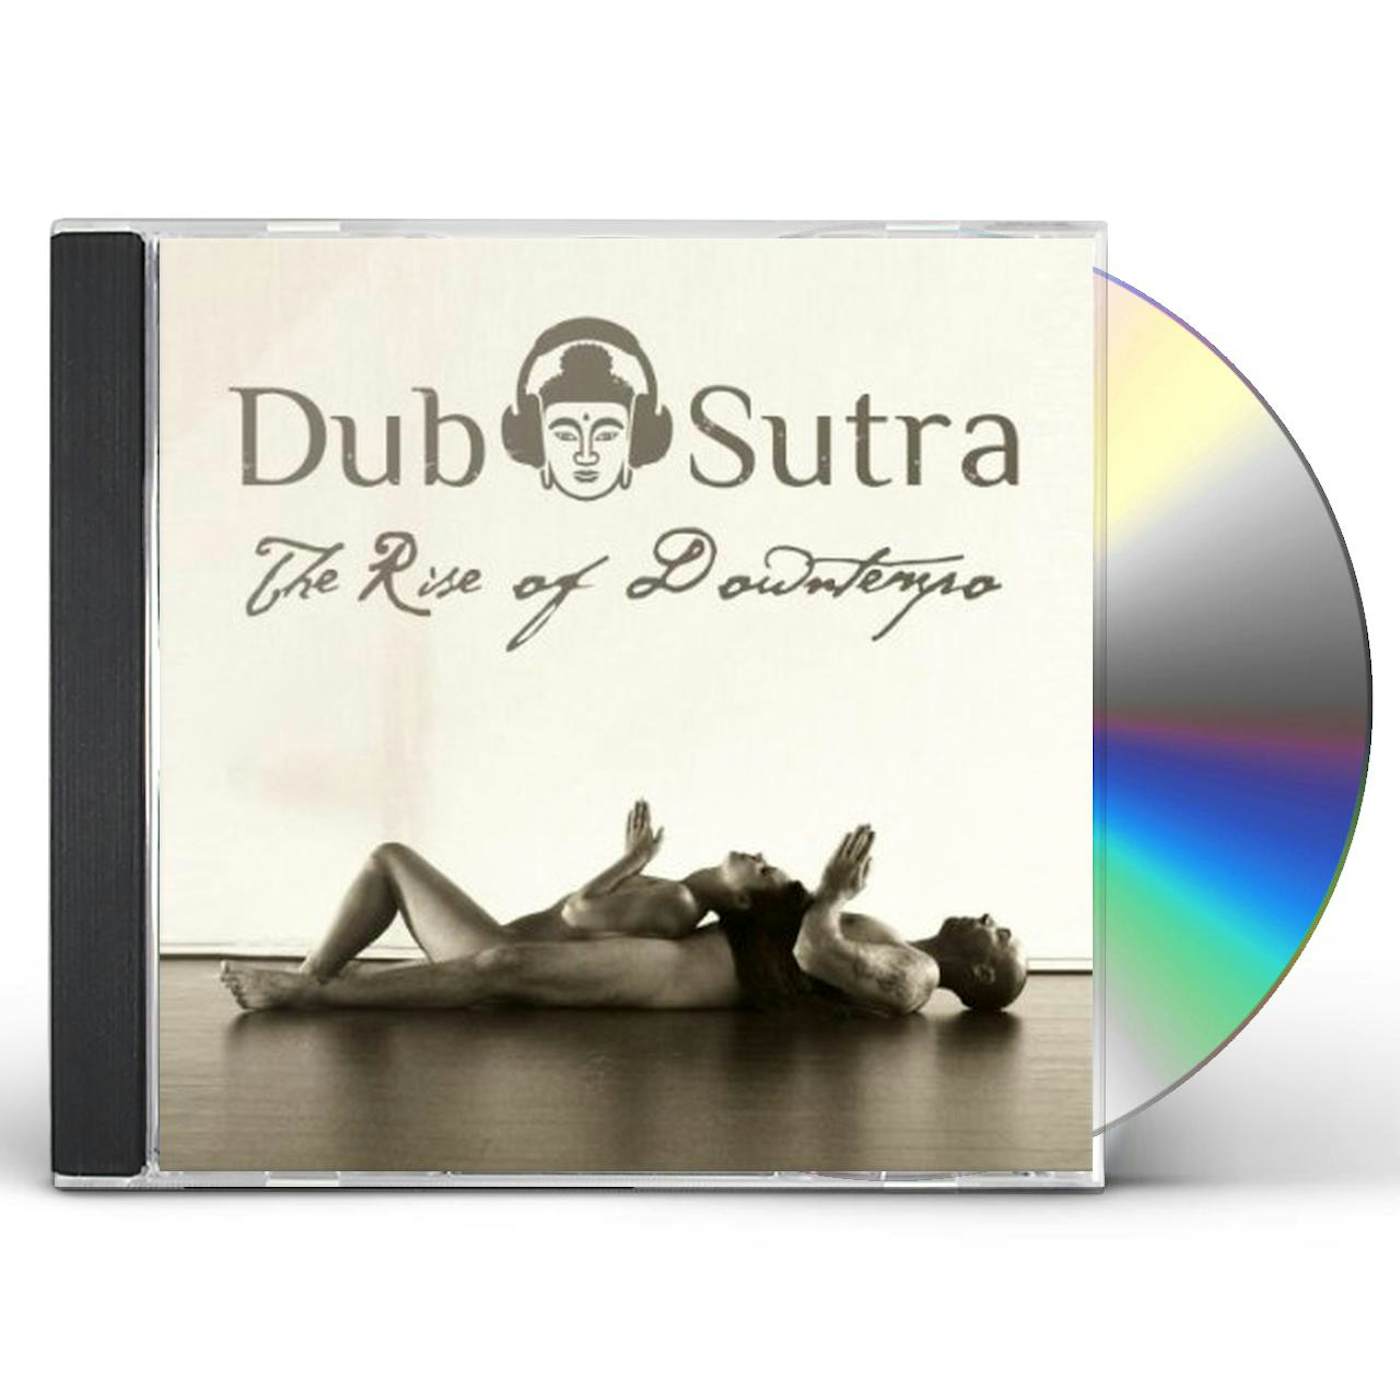 Dub Sutra RISE OF DOWNTEMPO CD